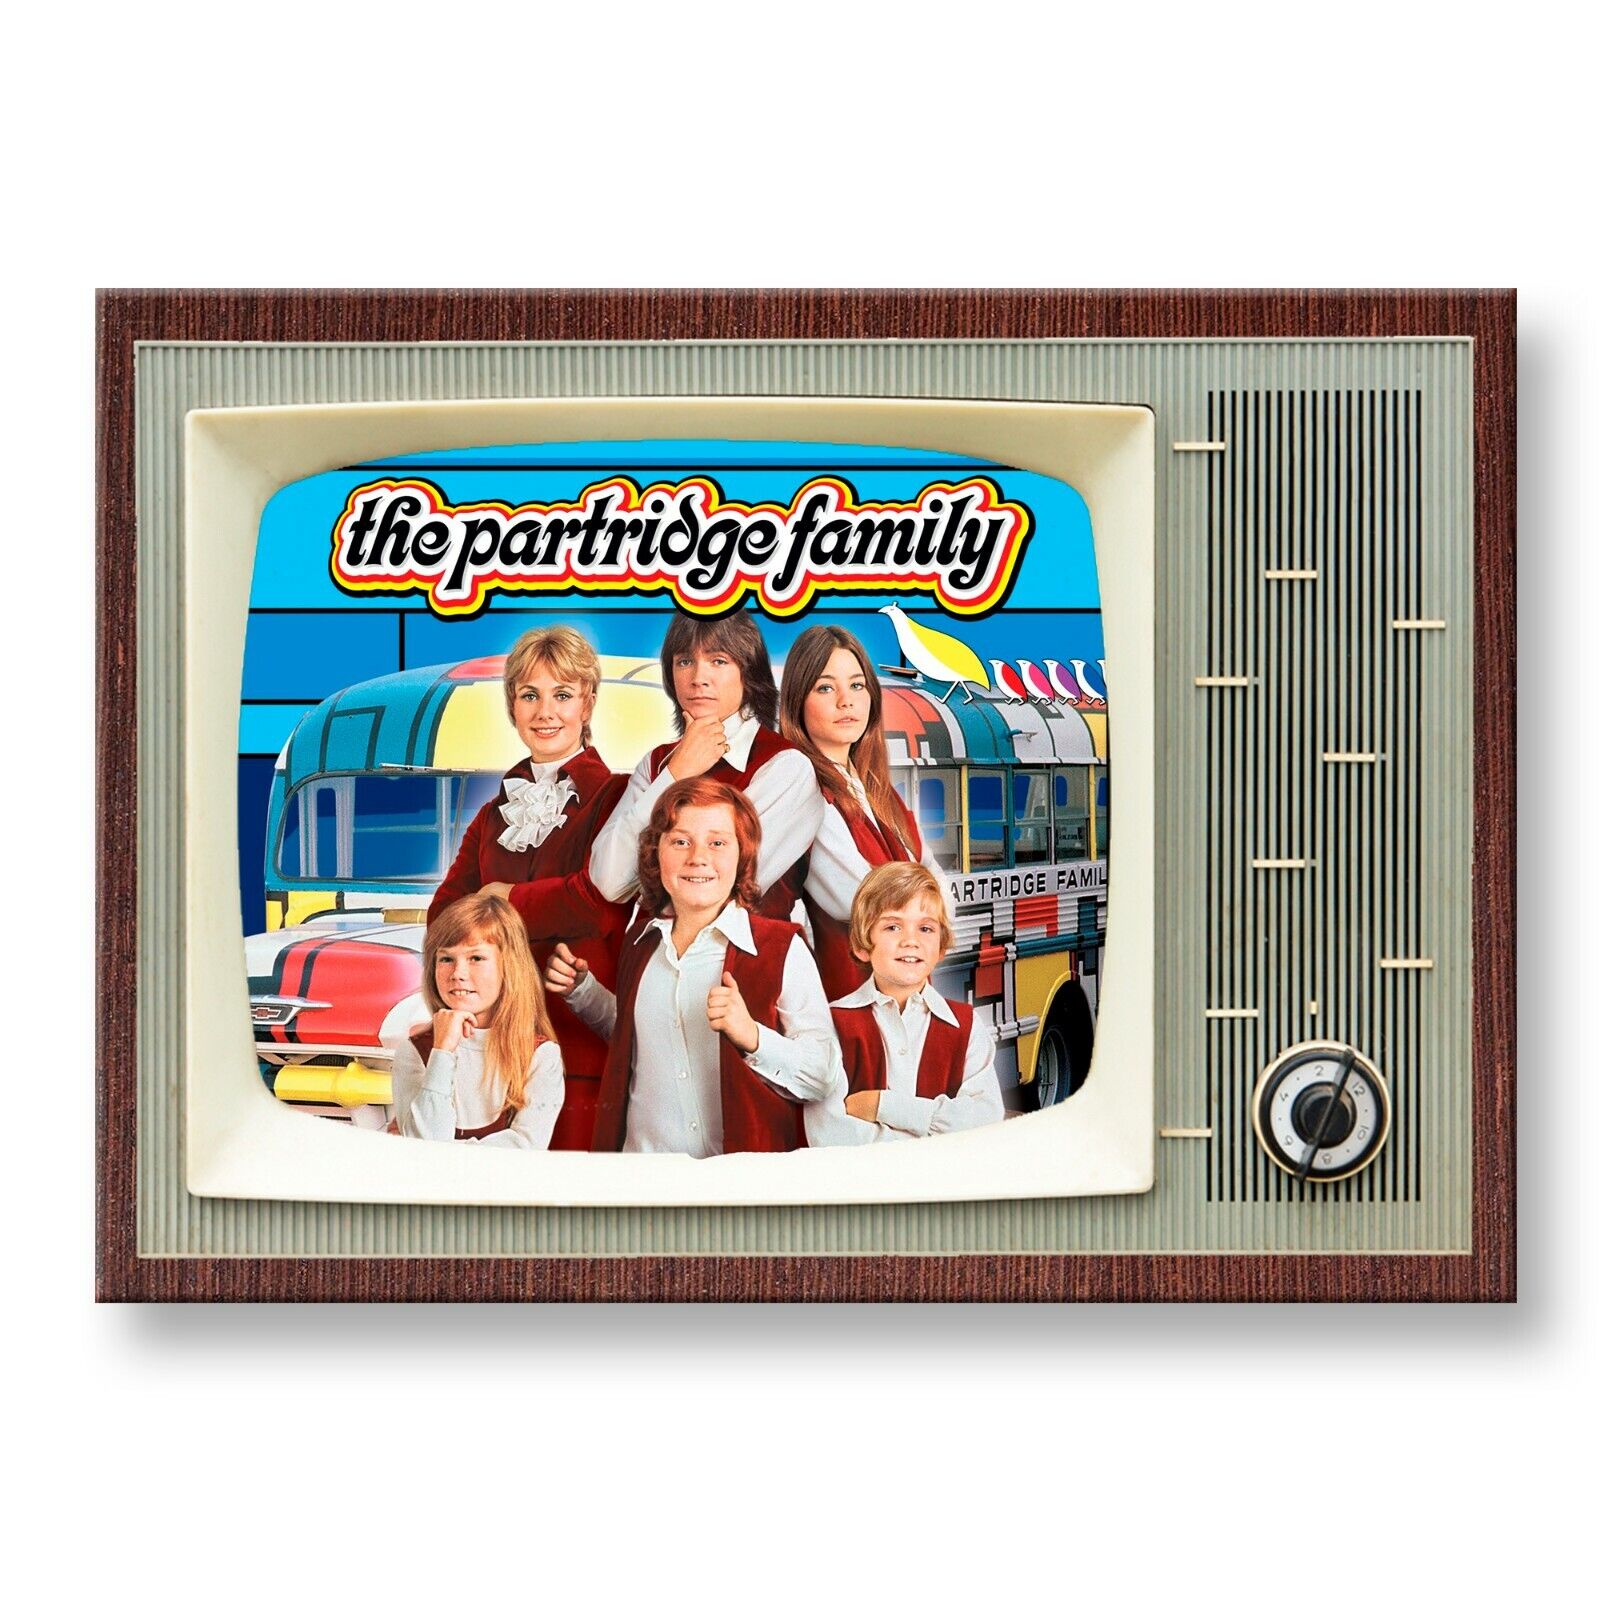 THE PARTRIDGE FAMILY TV Show Classic TV 3.5 inches x 2.5 inches FRIDGE MAGNET